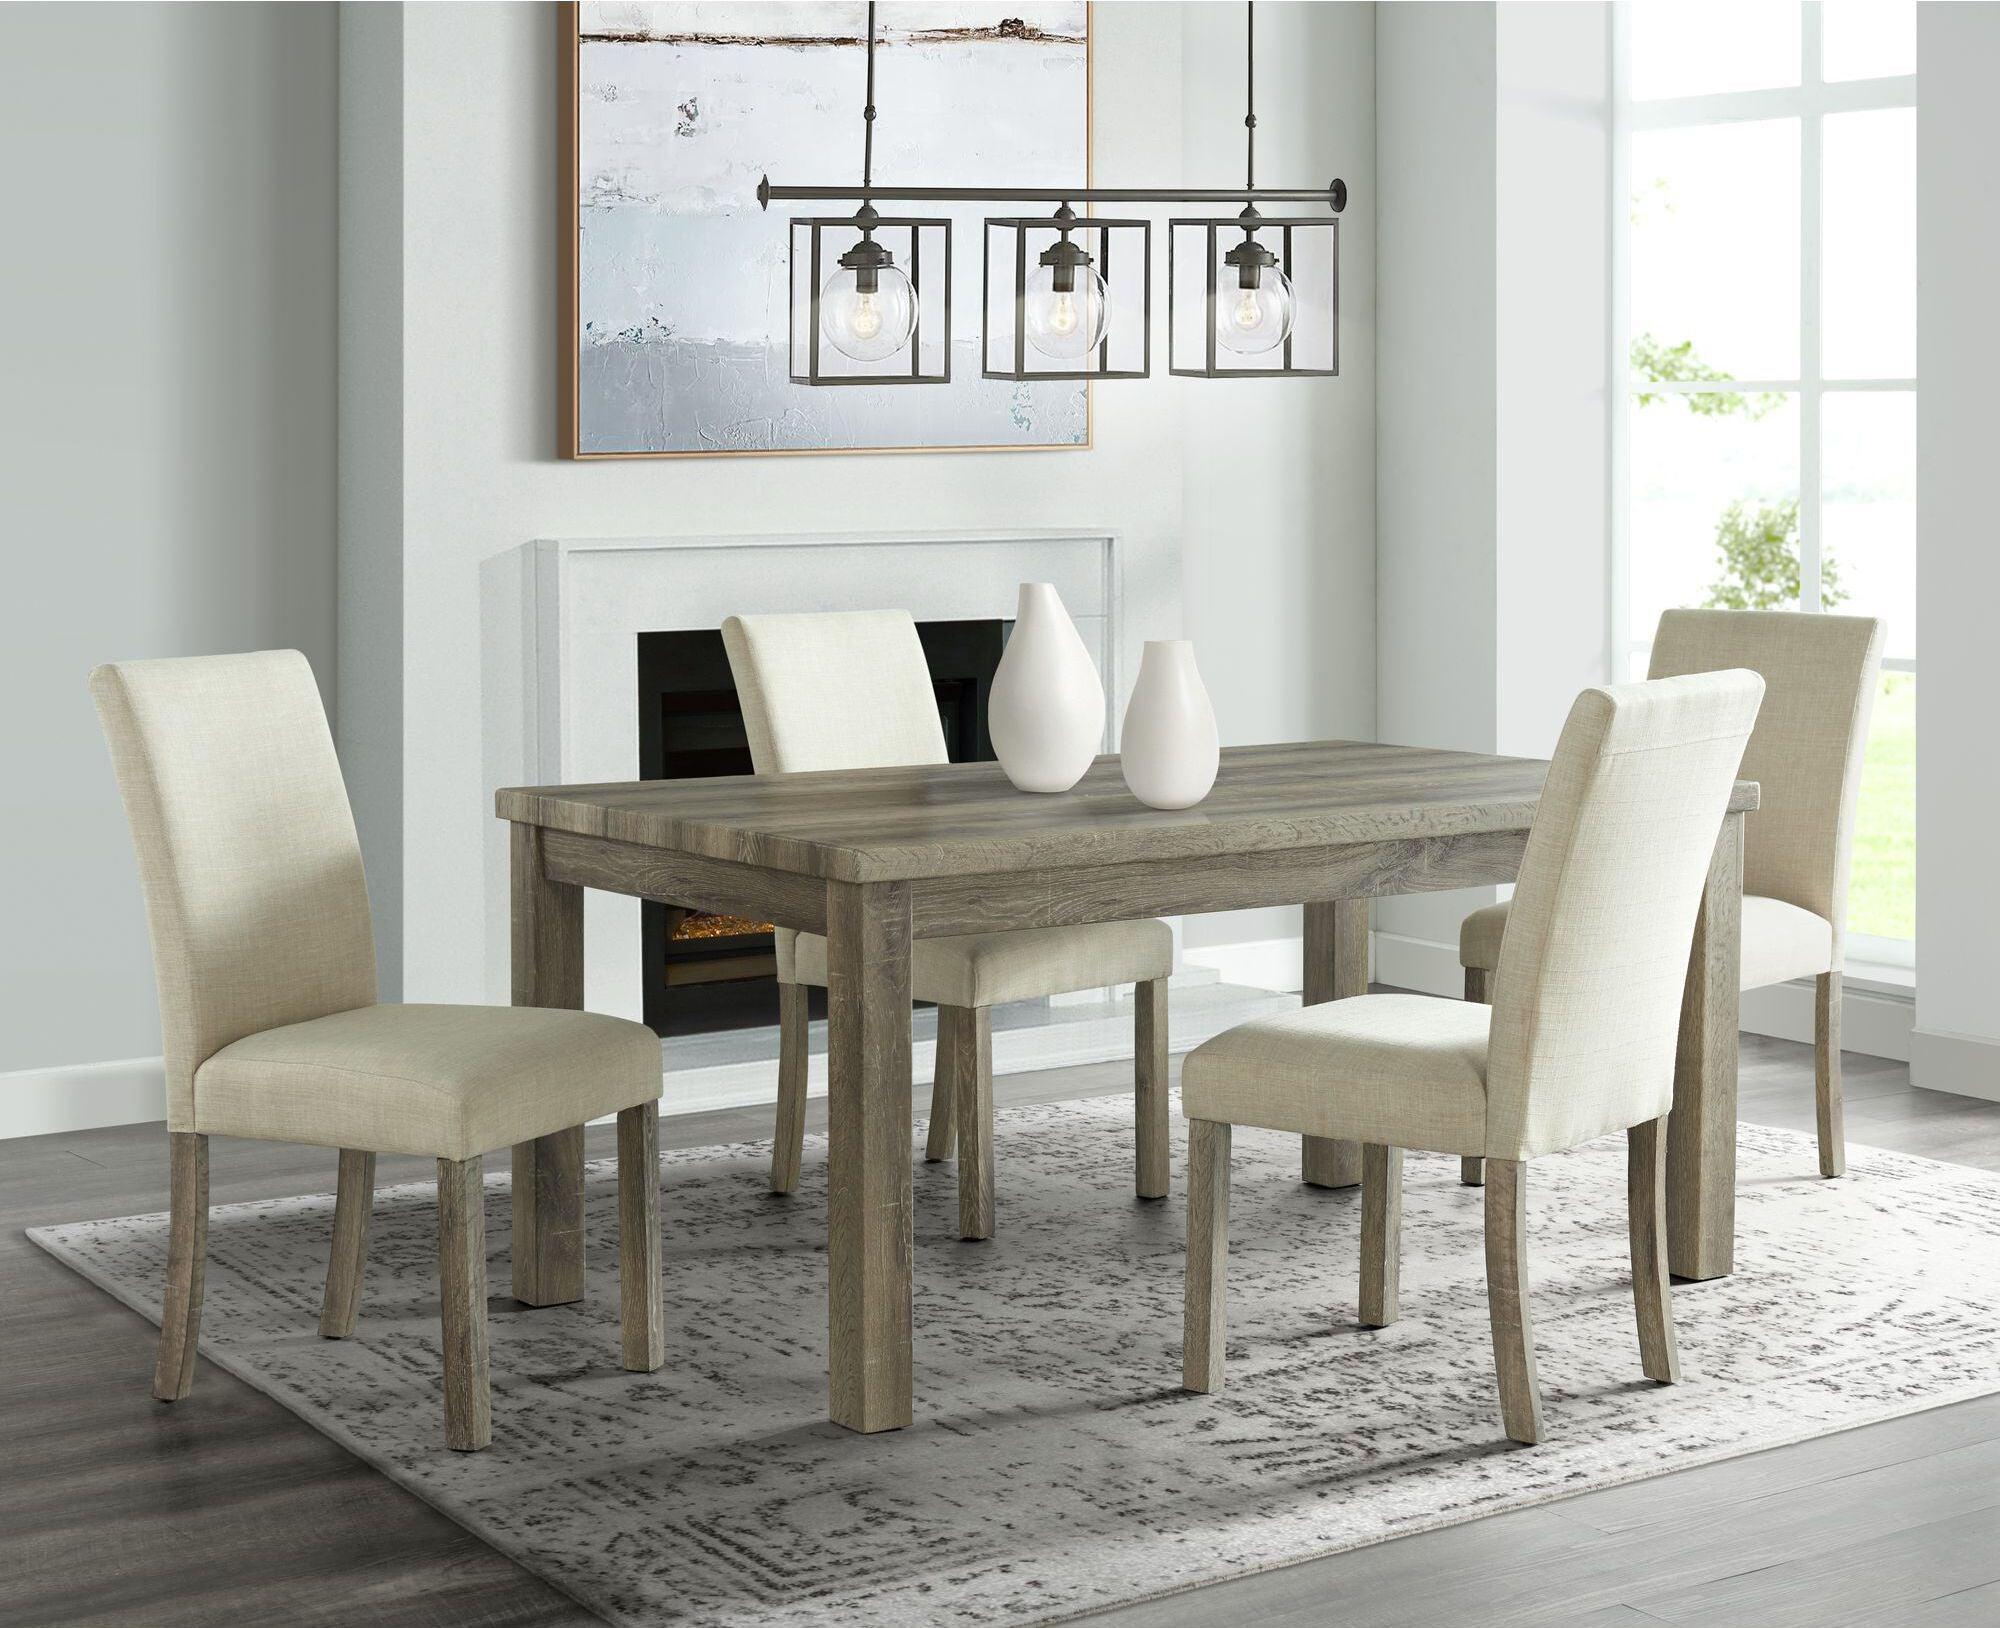 Elements Dining Tables - Turner Rectangular Dining Table